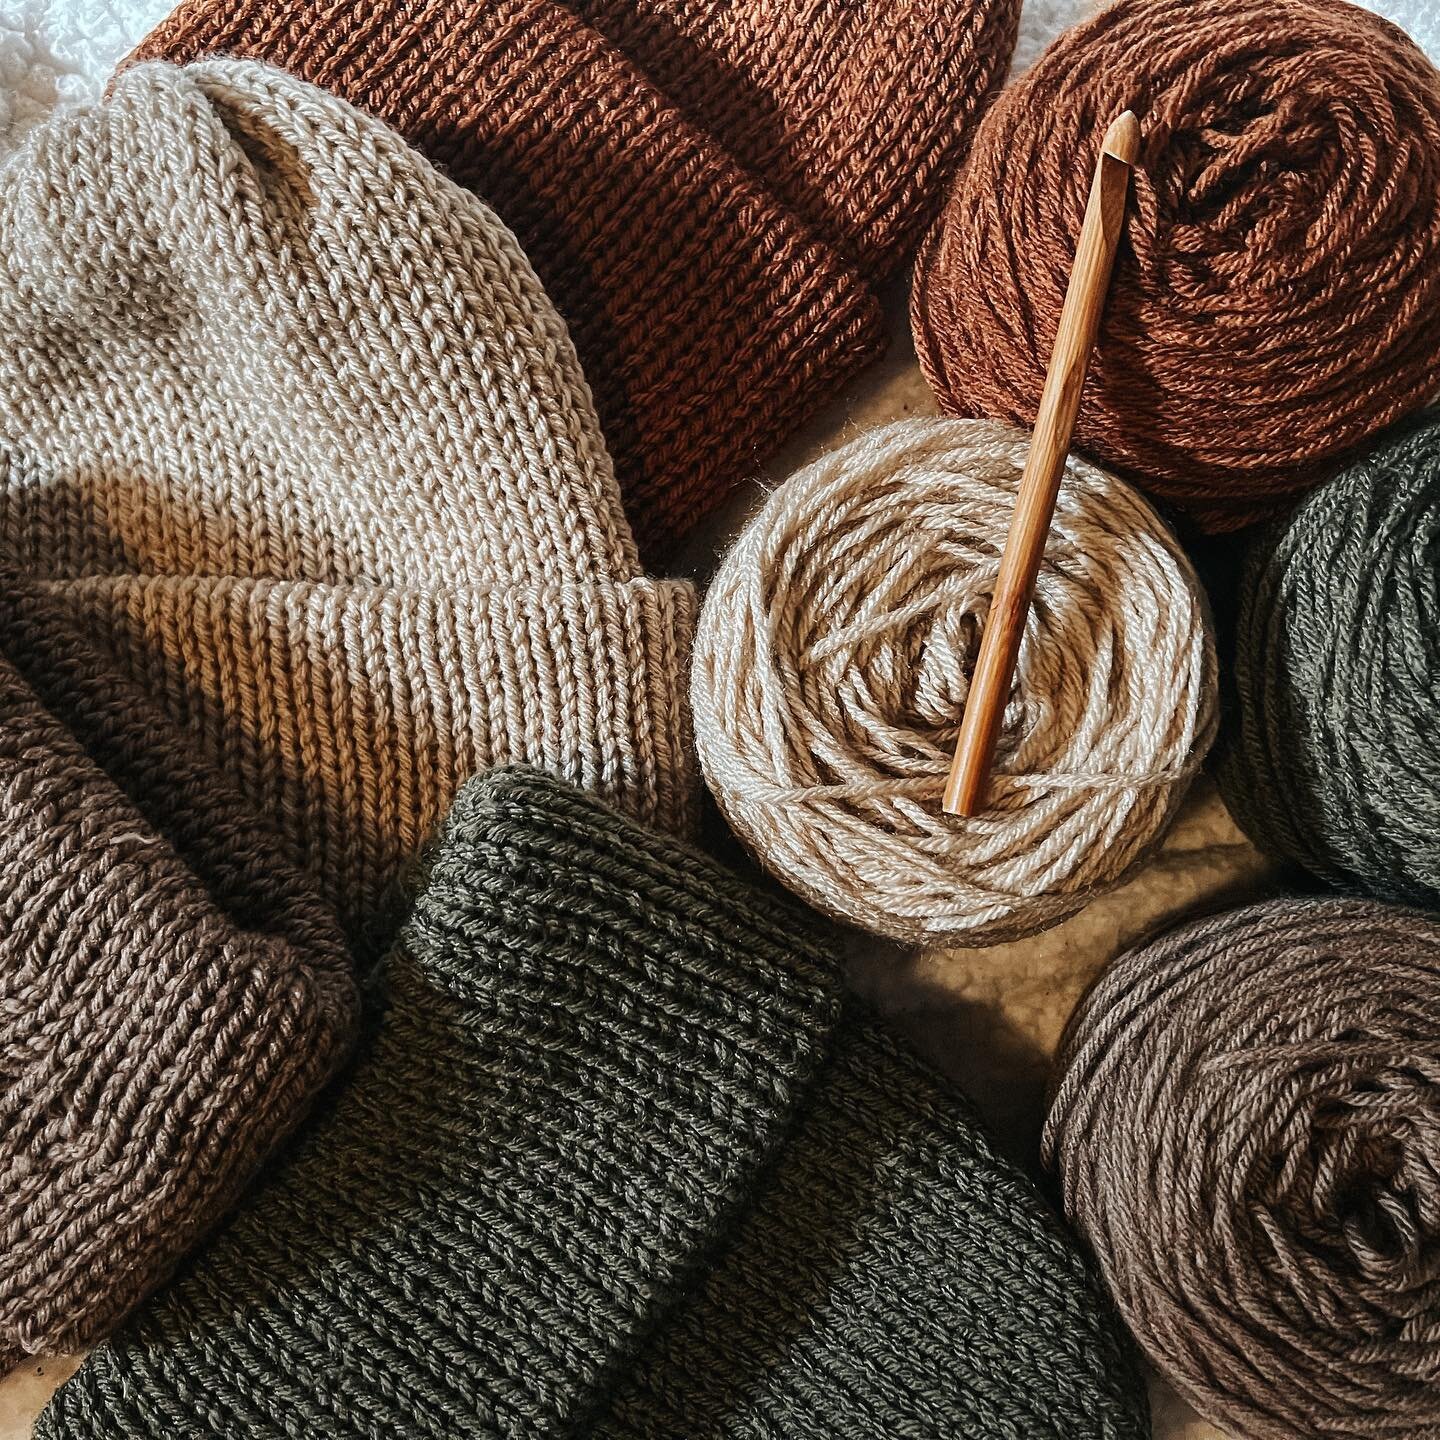 New double thick beanie shades will be available for wholesale later today 🍂
Did you know The Hook Up Crochet Co. offers wholesale kits and finished items? Any brick and mortar store can order wholesale items through our storefront with @faire_whole